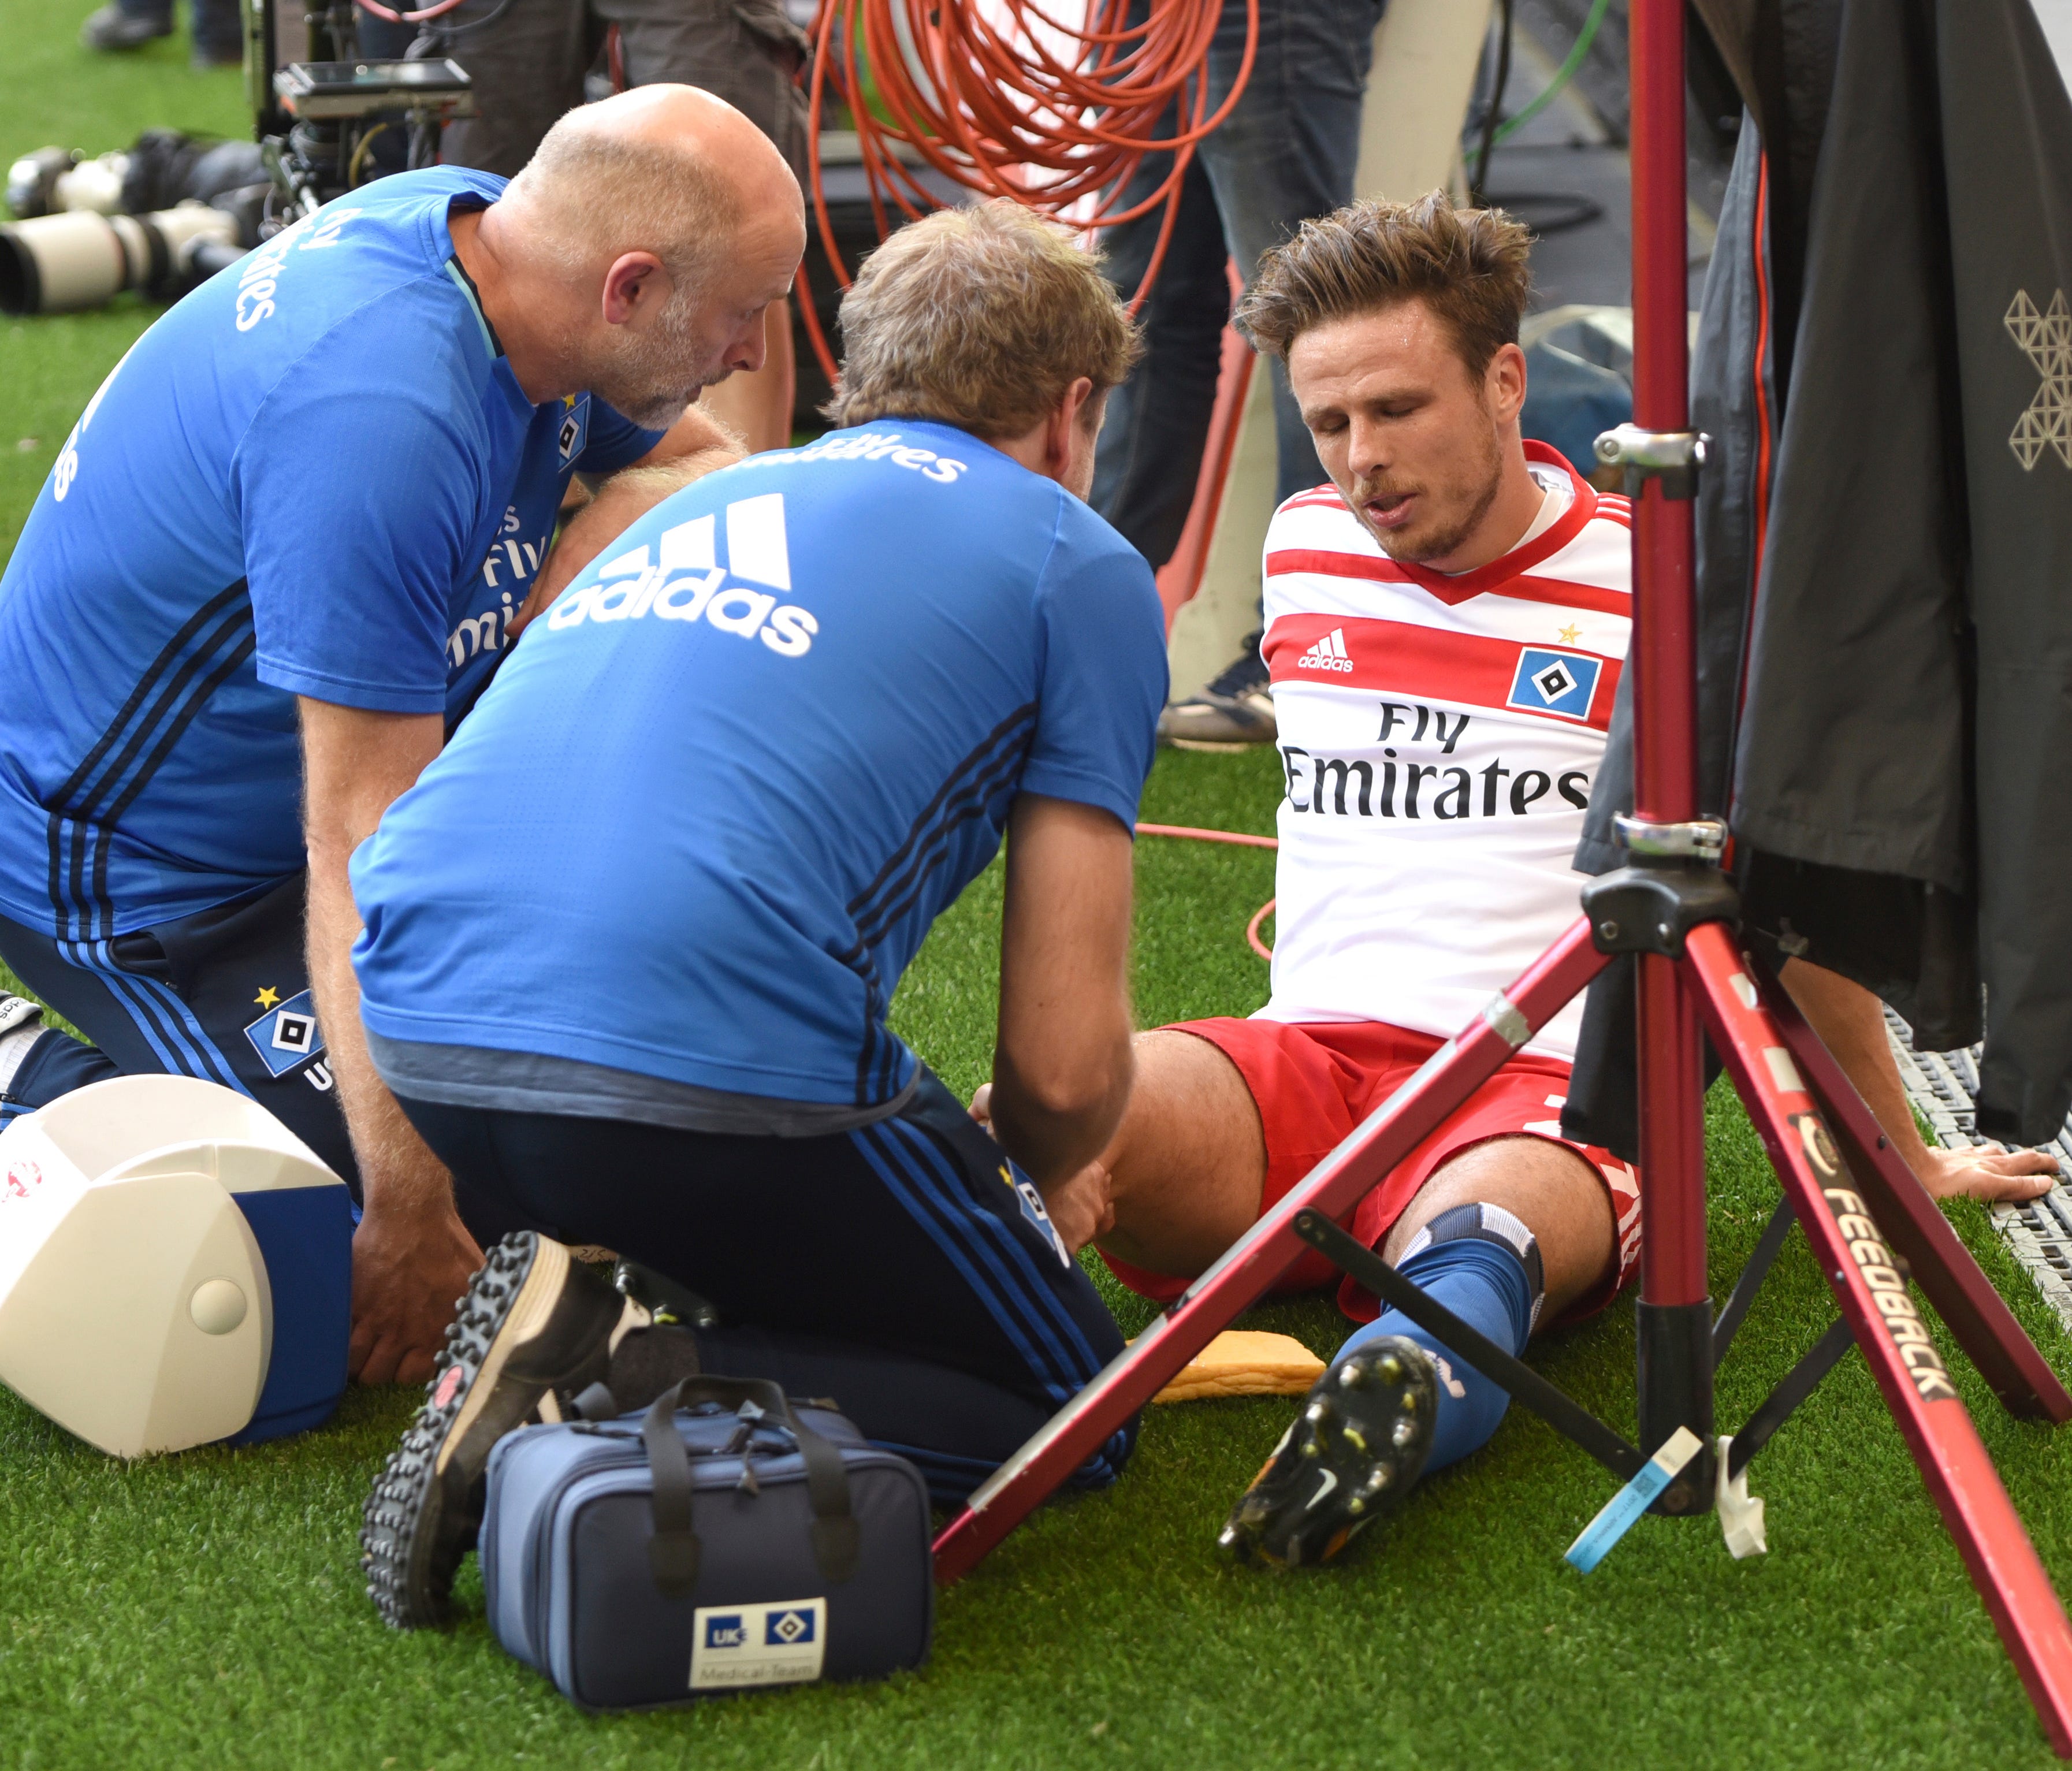 Hamburg's Nicolai Mueller is treated during the German Bundesliga match after being injured during a celebration.